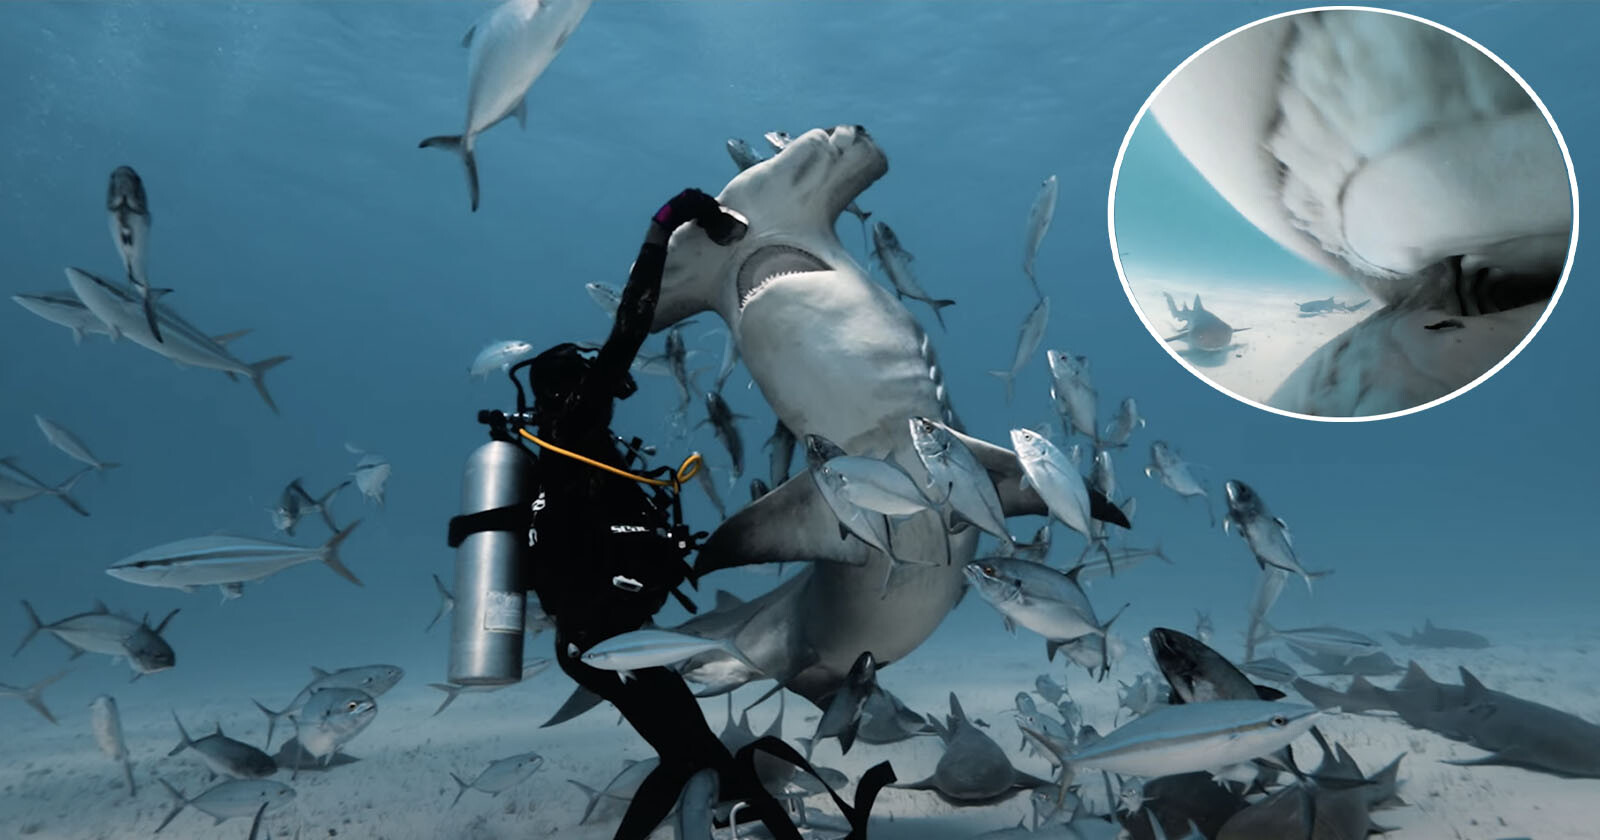 Go Inside the Mouth of a Giant Hammerhead Shark in Insane Footage